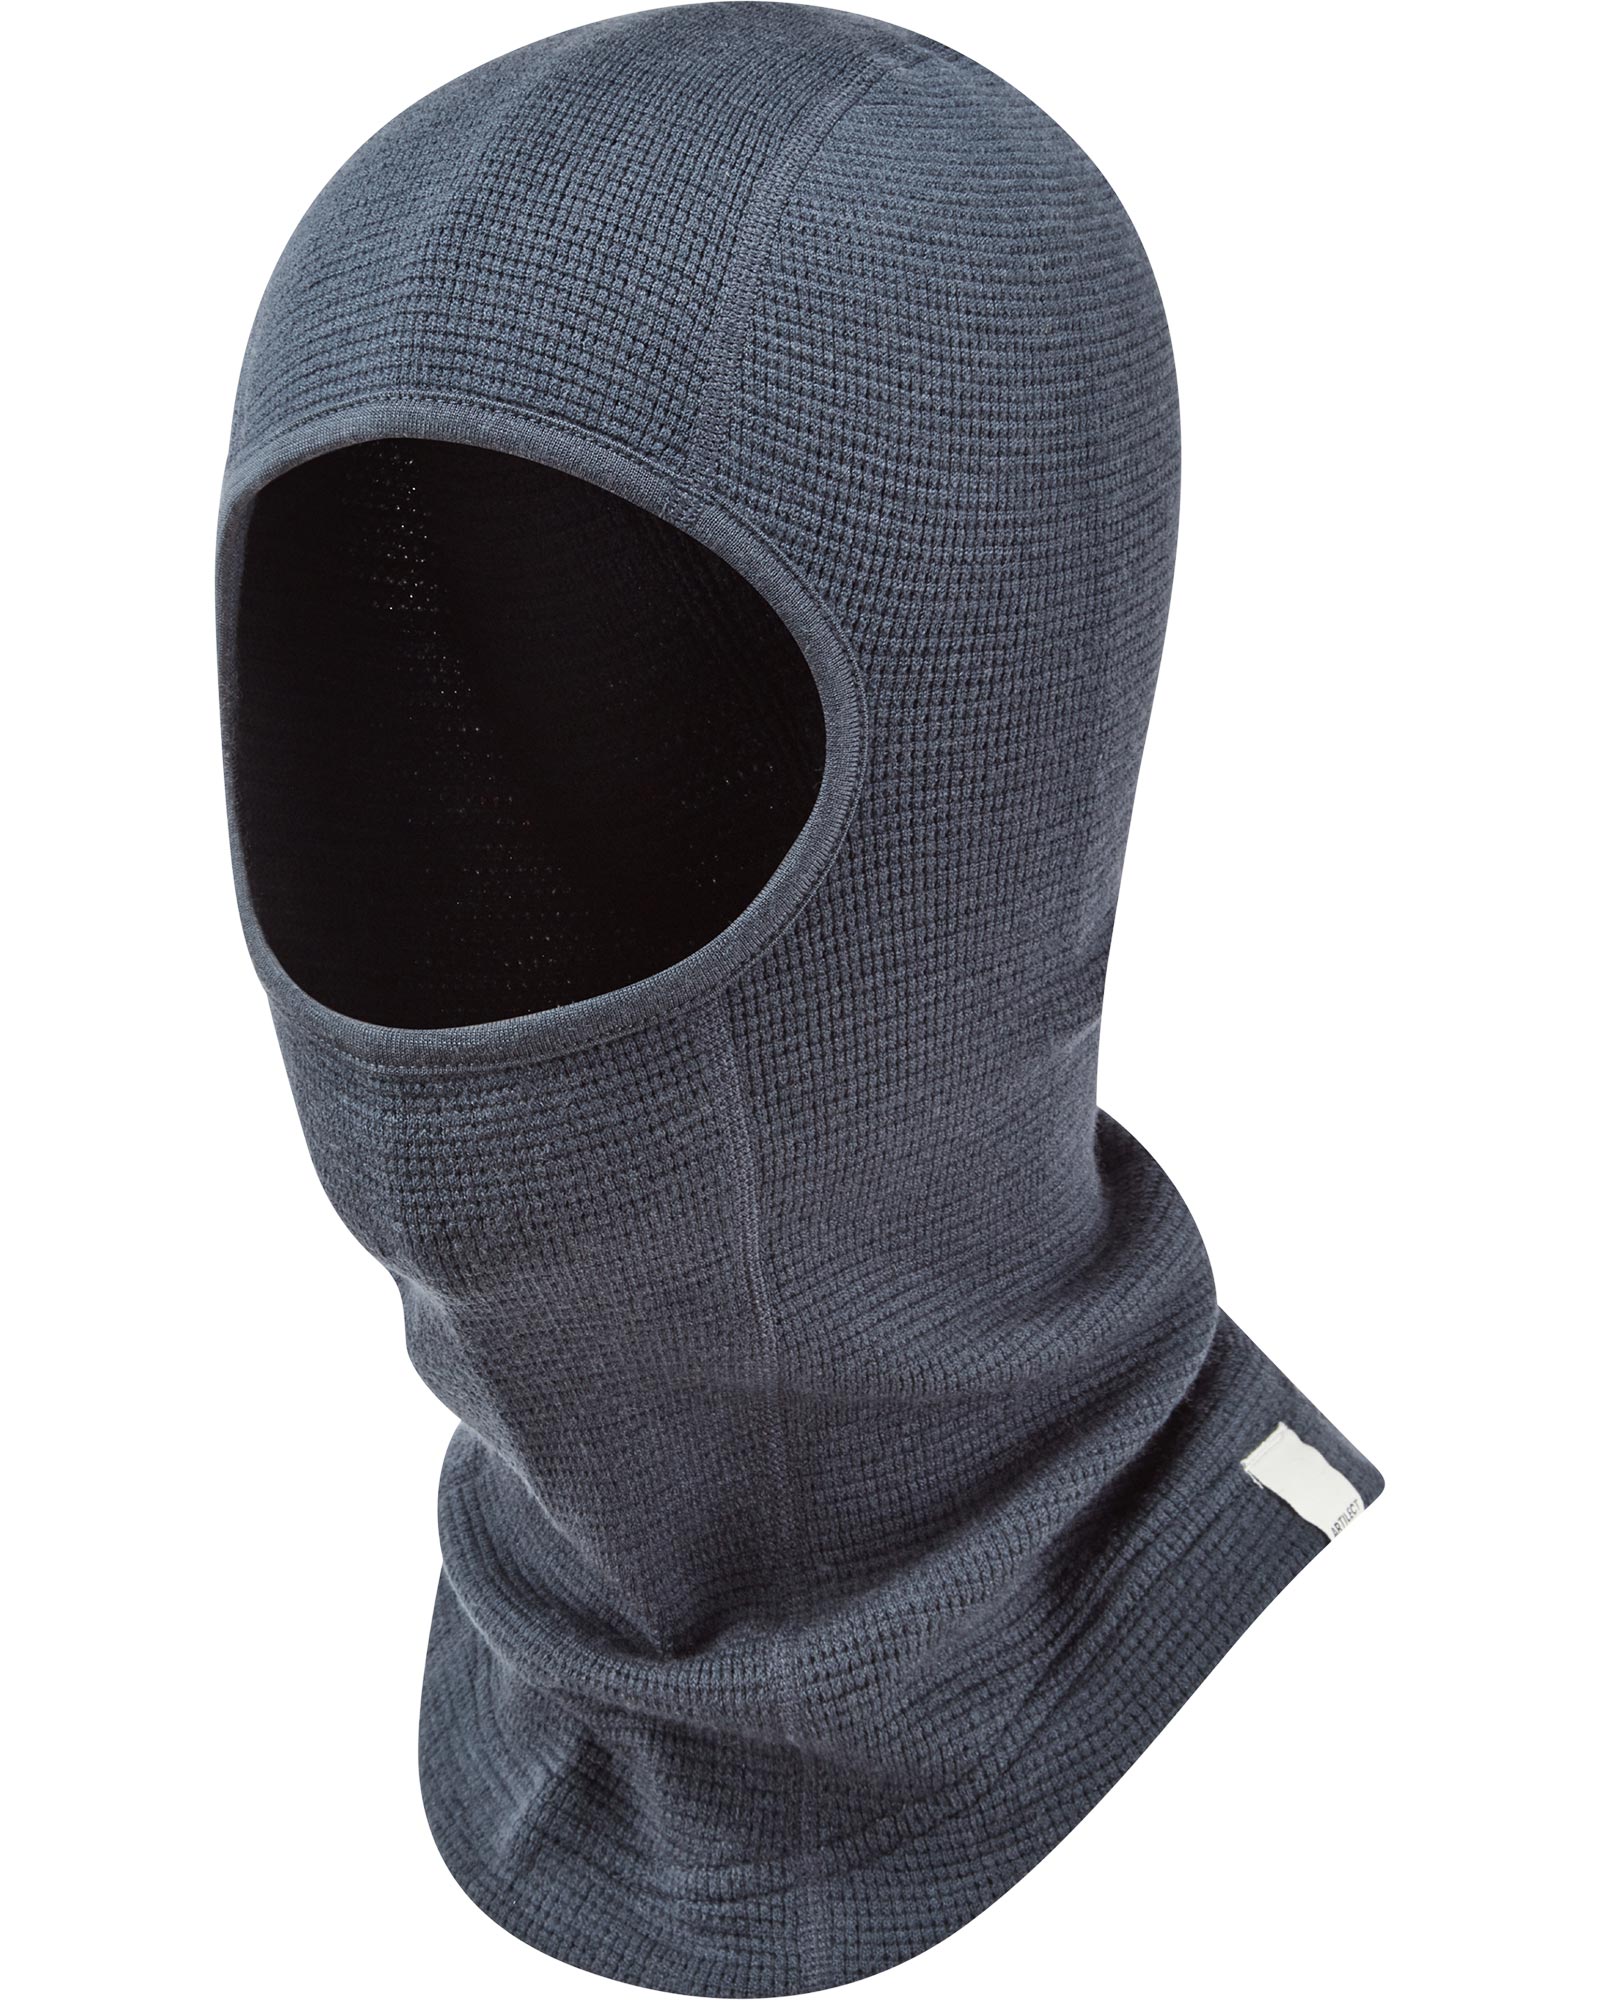 Product image of Artilect Valley 250 Balaclava